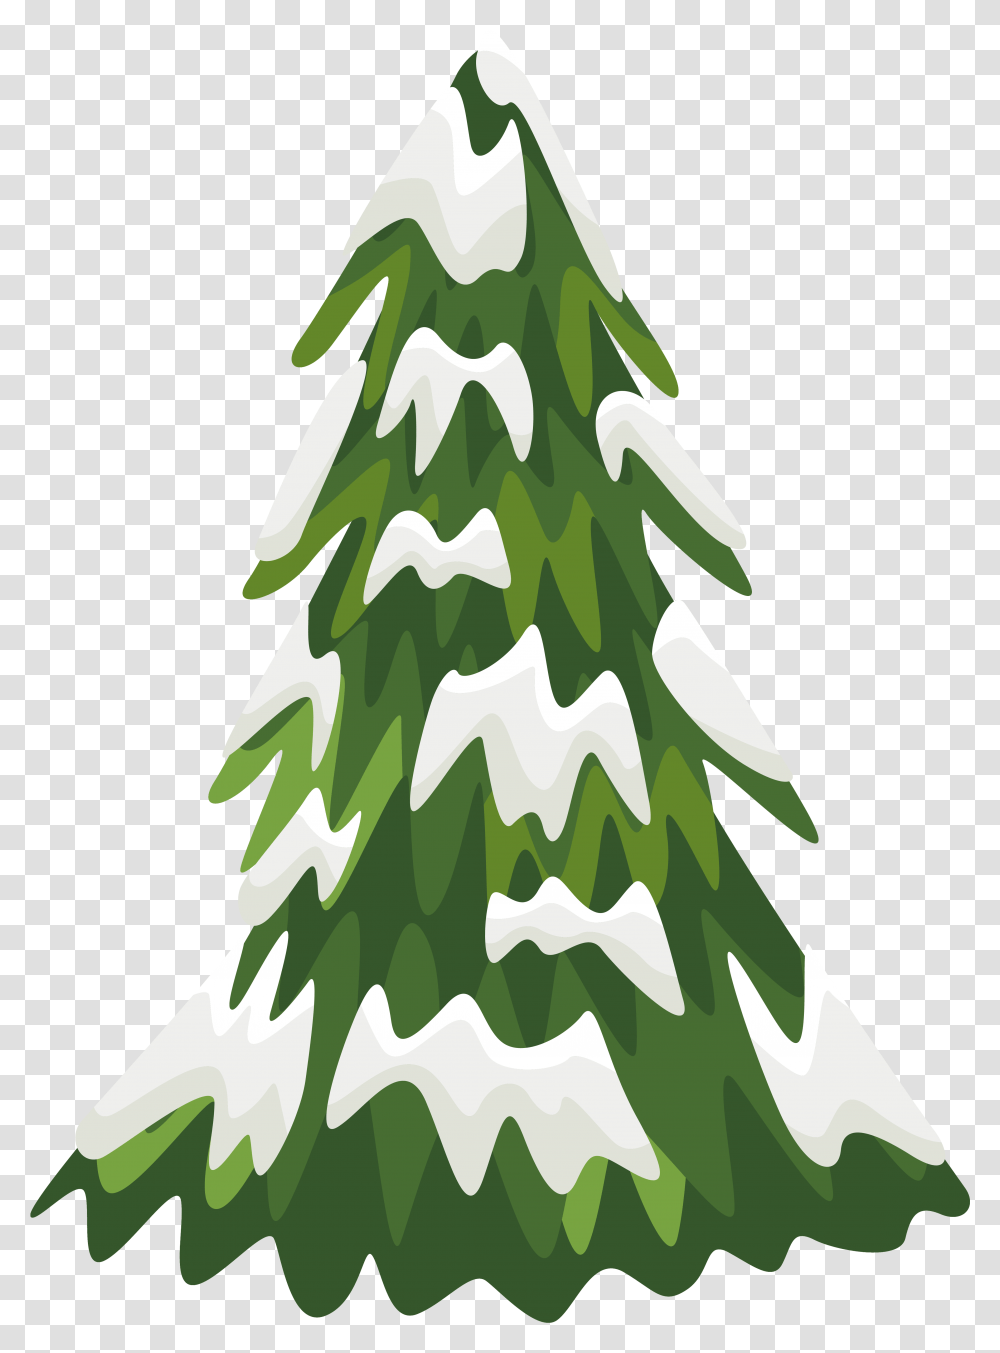 Bark Drawing Pine Tree Snowy Tree Clipart, Military Uniform, Plant, Camouflage Transparent Png